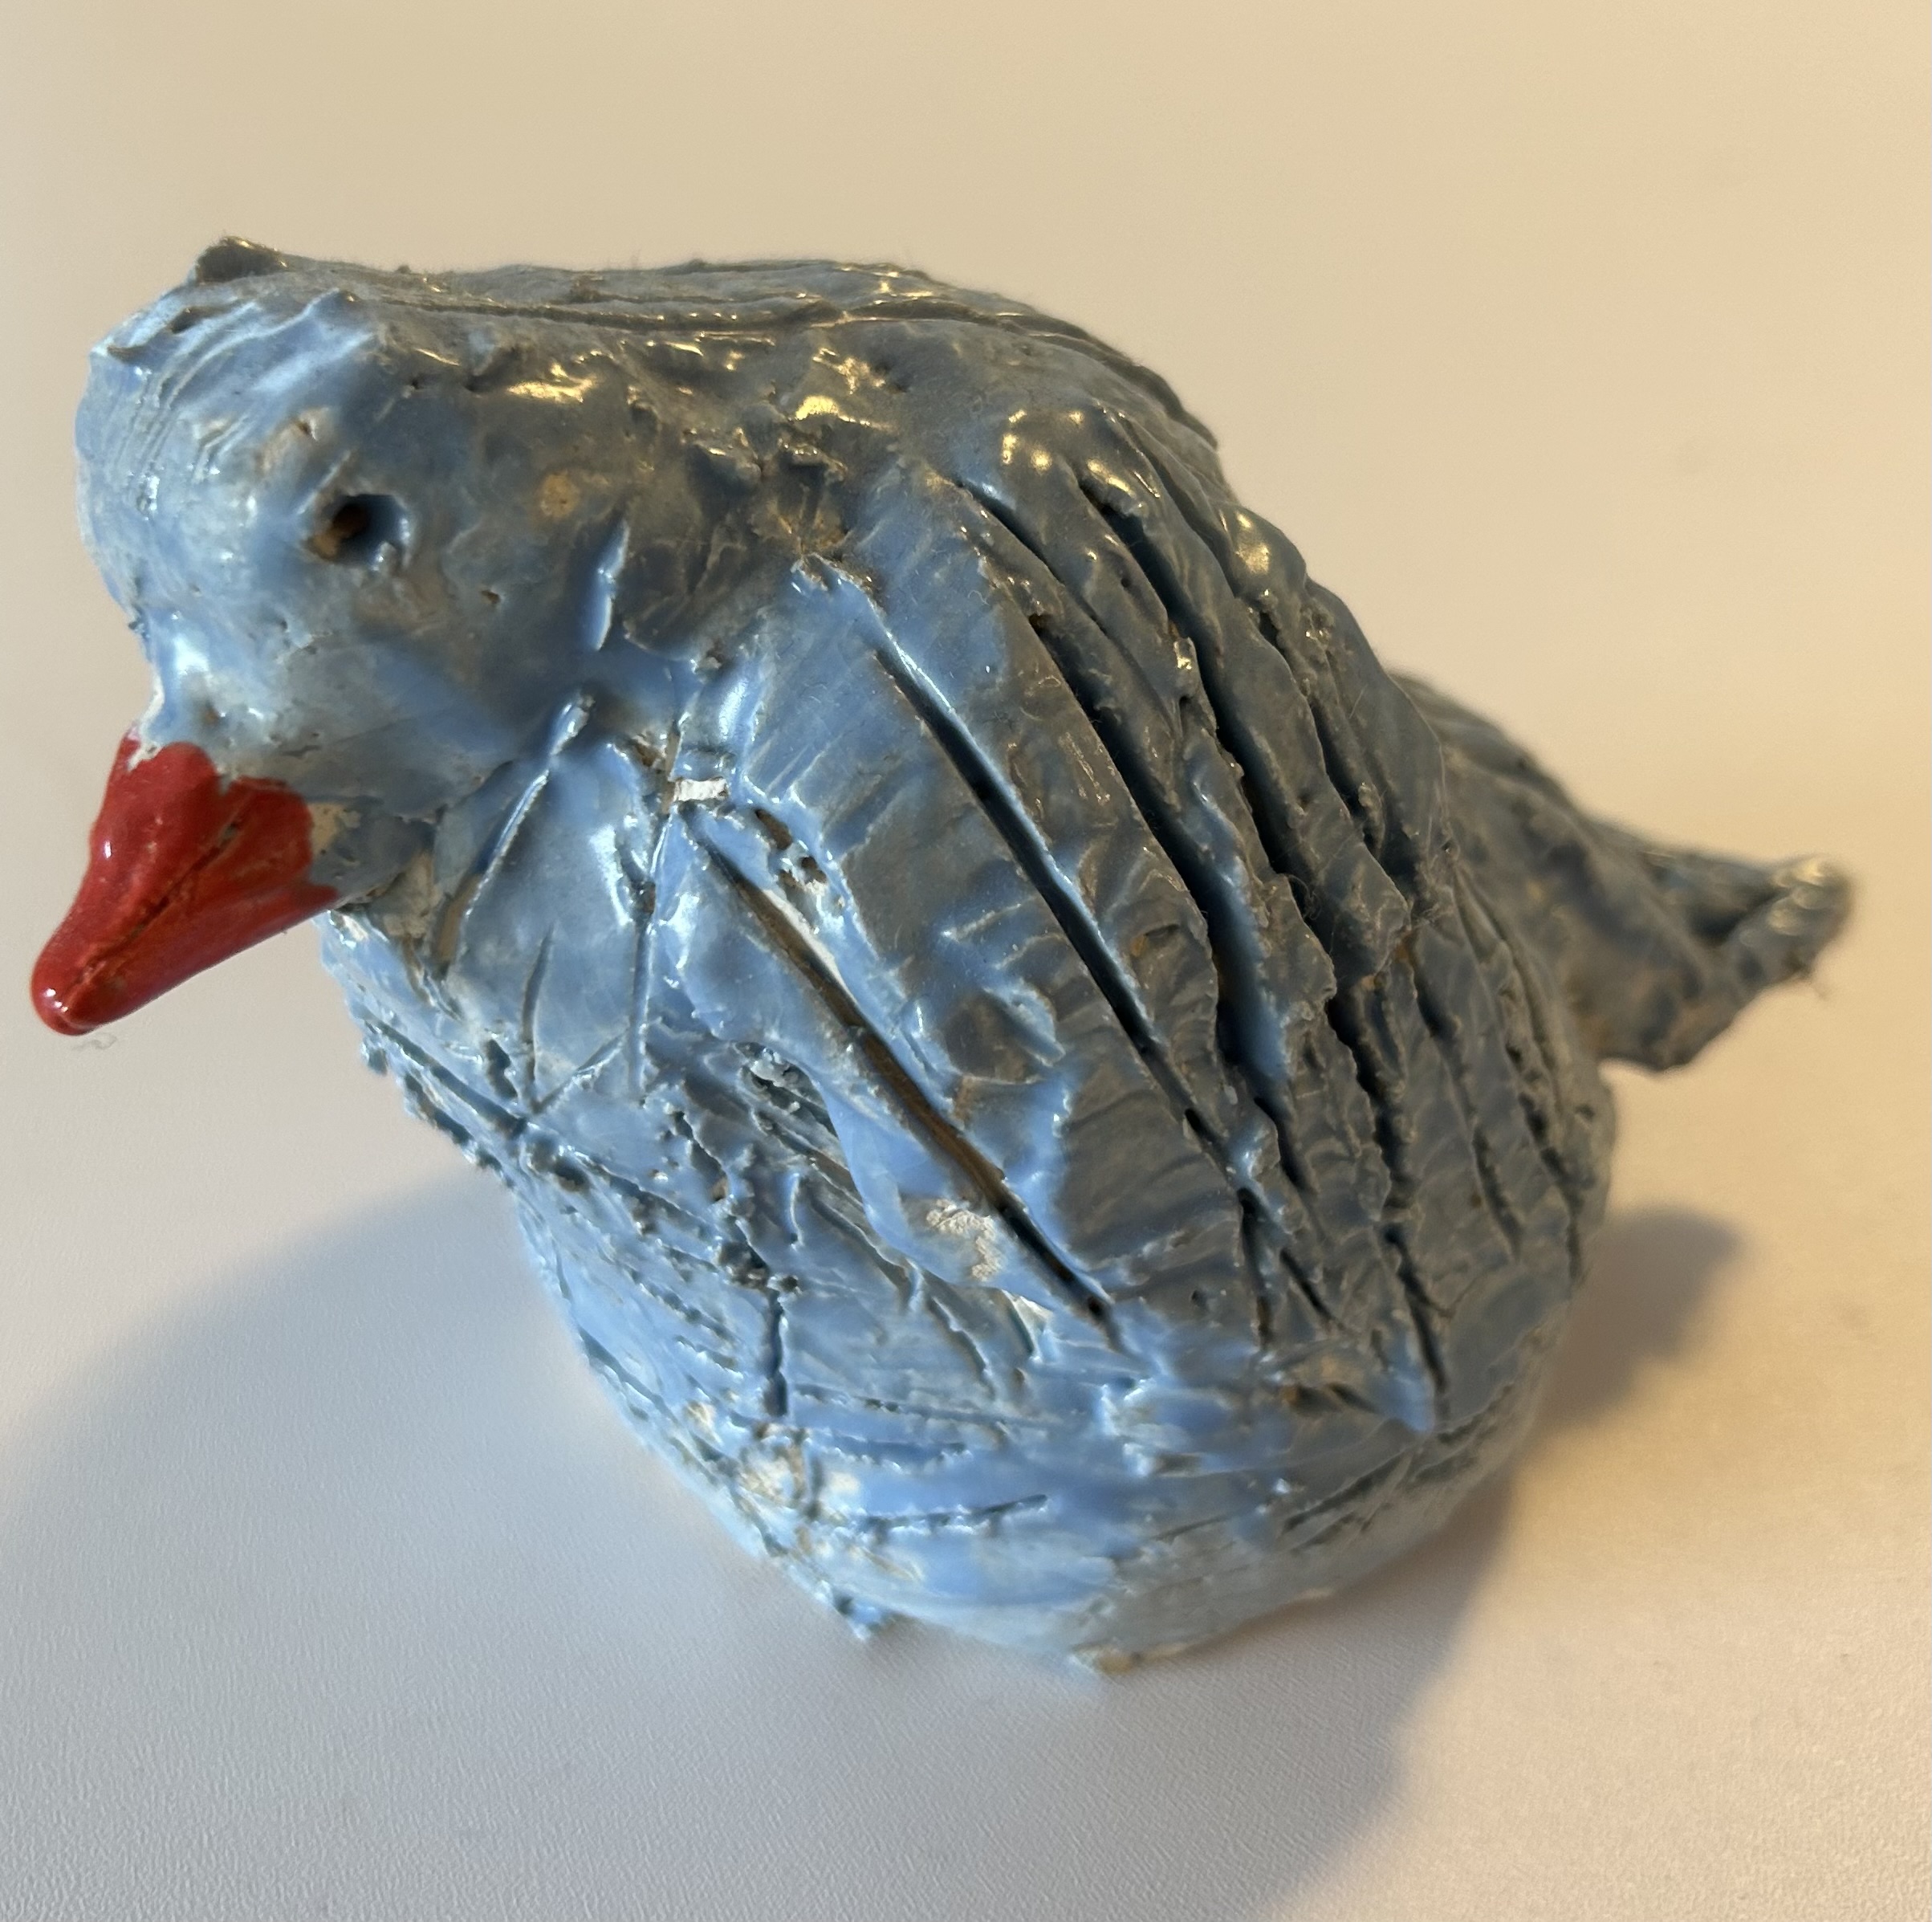 a painted sculpture of a blue colored bird sitting with an orange beak, by a child